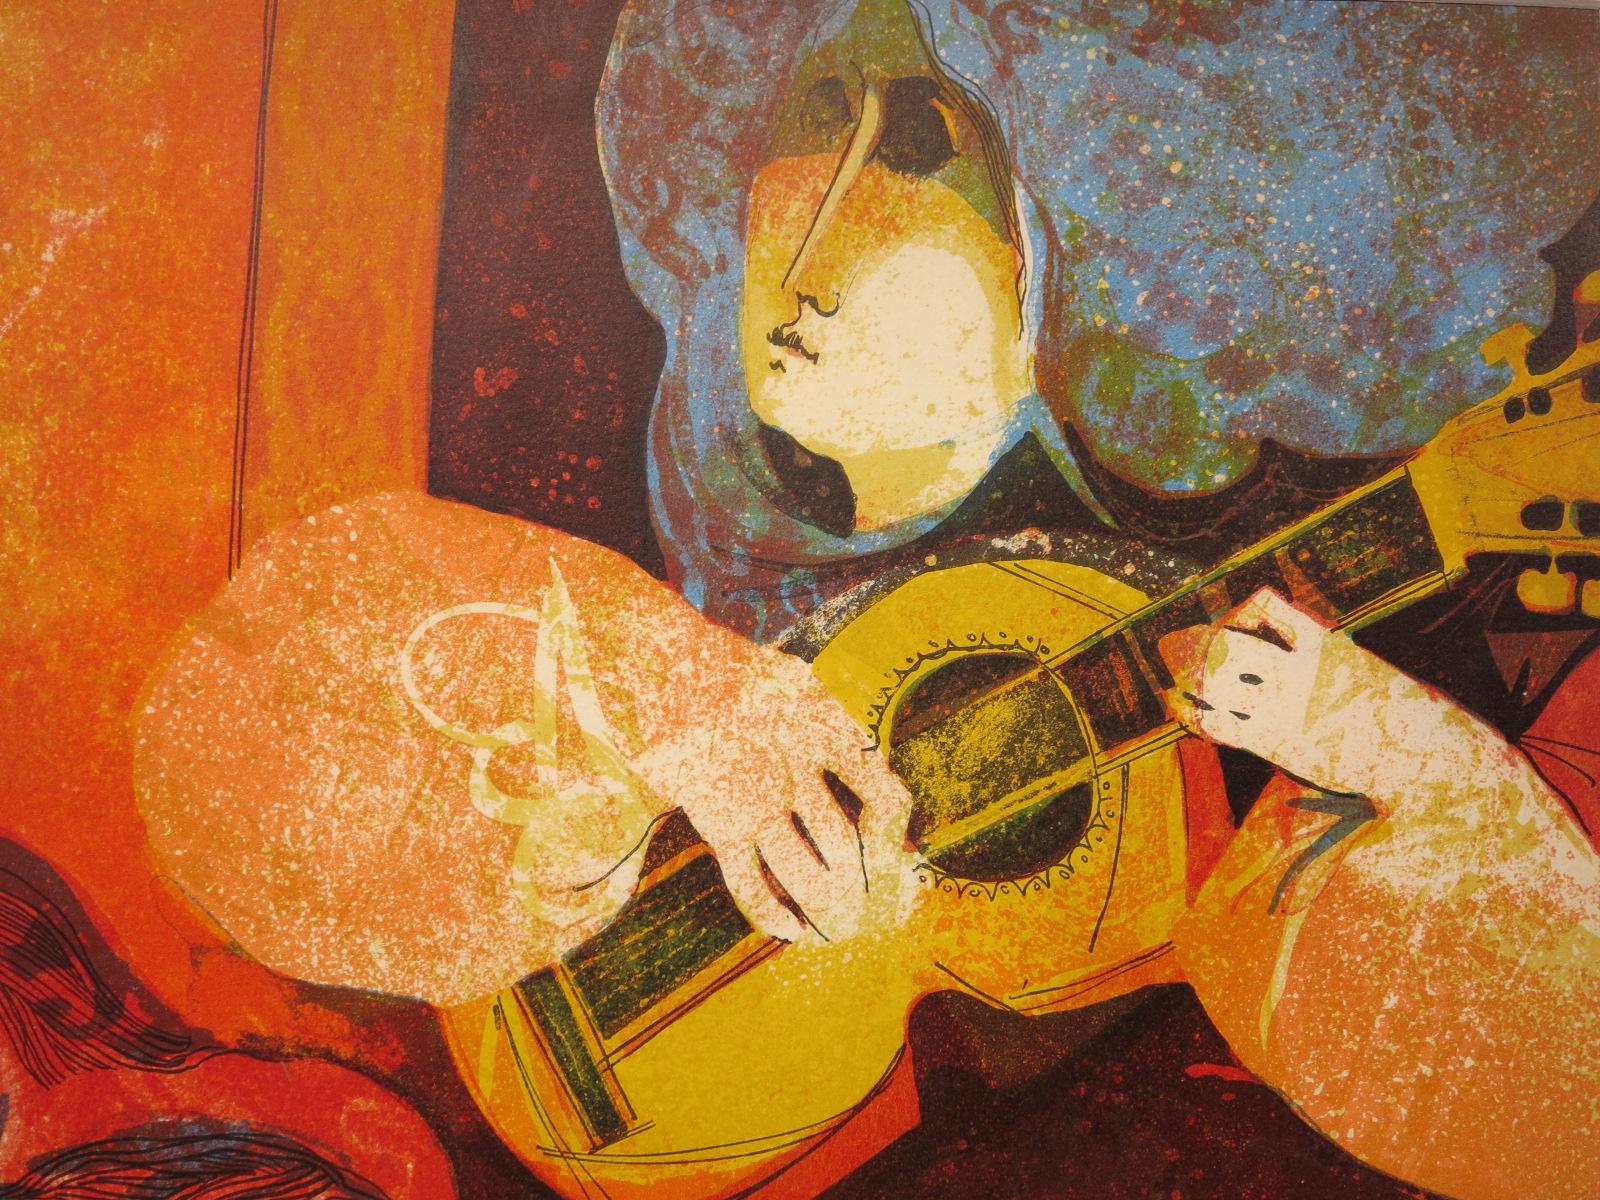 Two Women with Guitar  - Abstract Print by Sunol Alvar